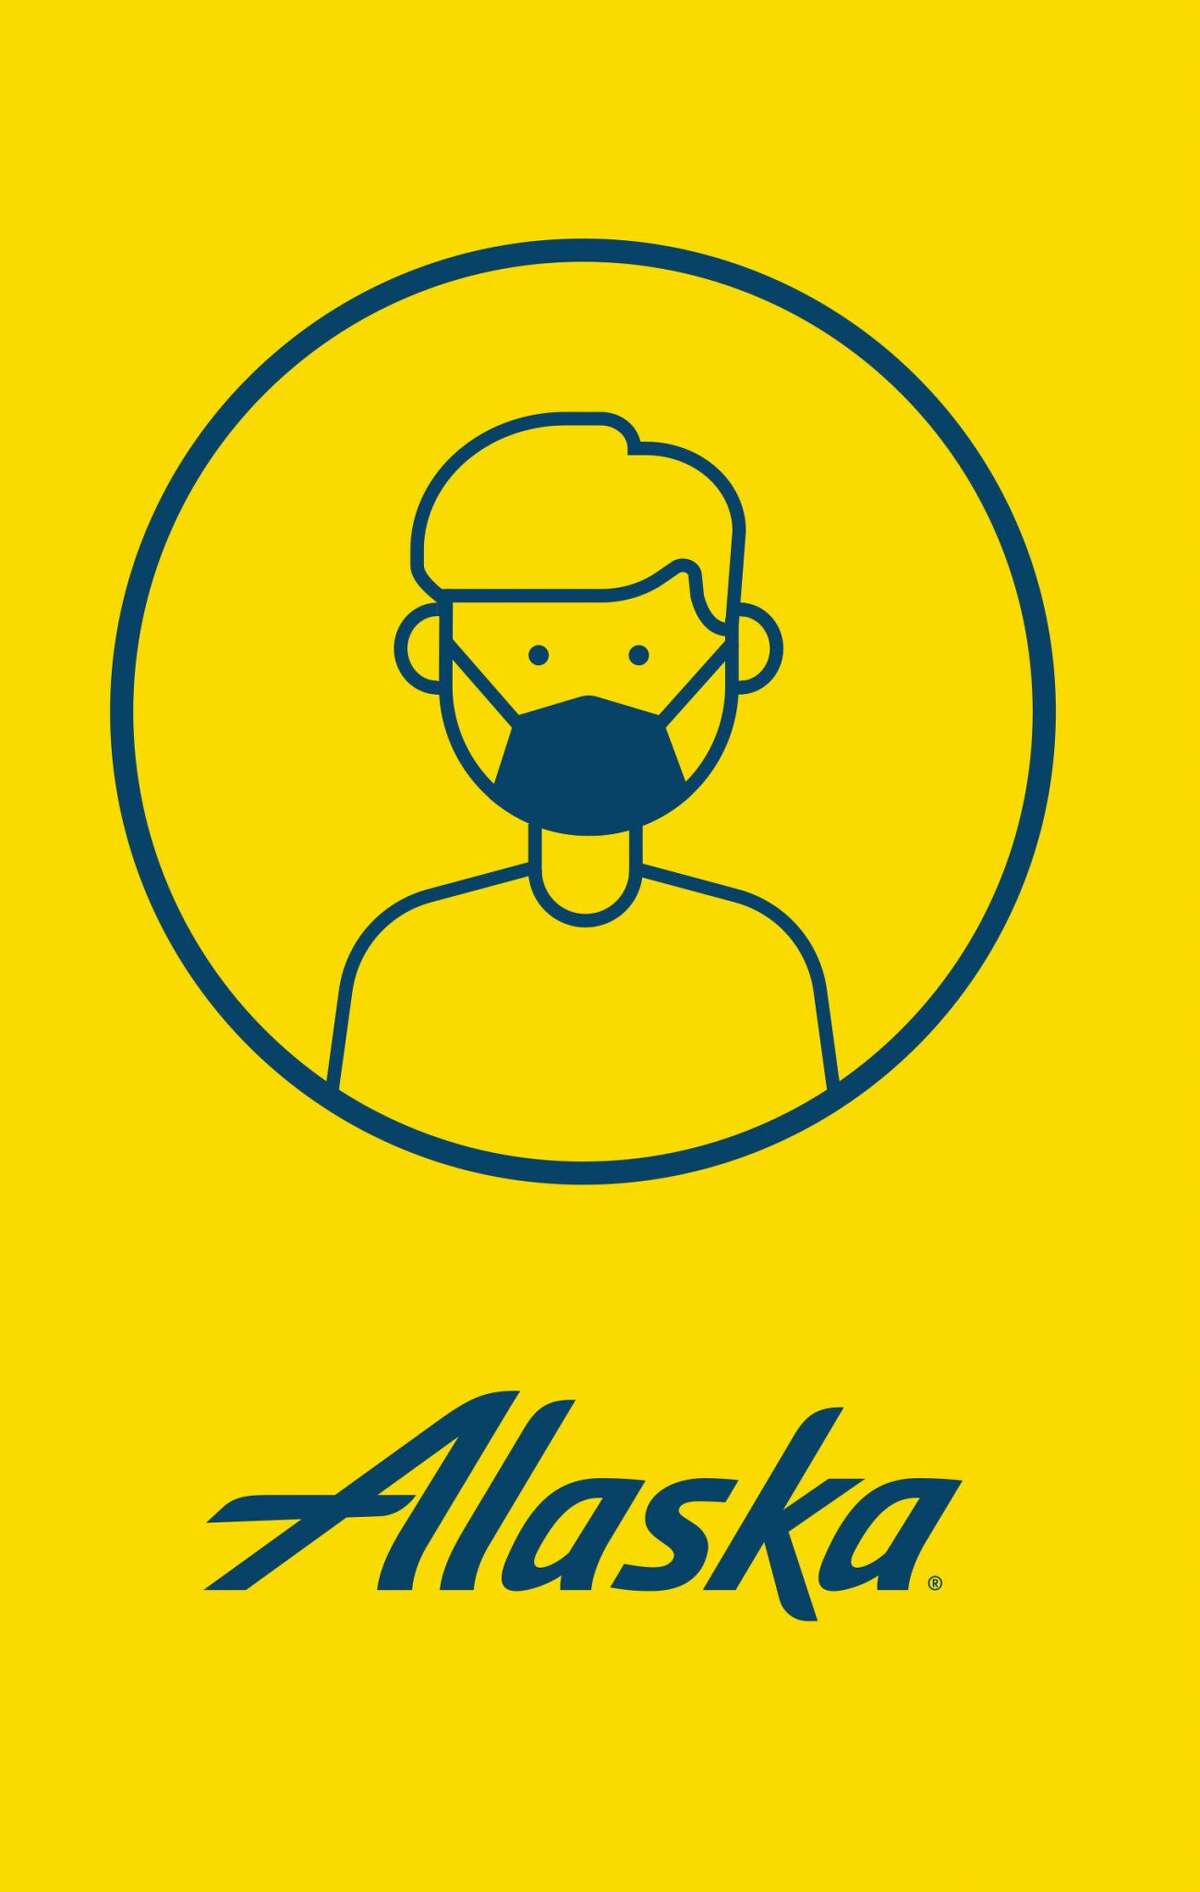 Alaska Airlines strengthens face covering policy Aug. 7: No mask, no travel, no exceptions.